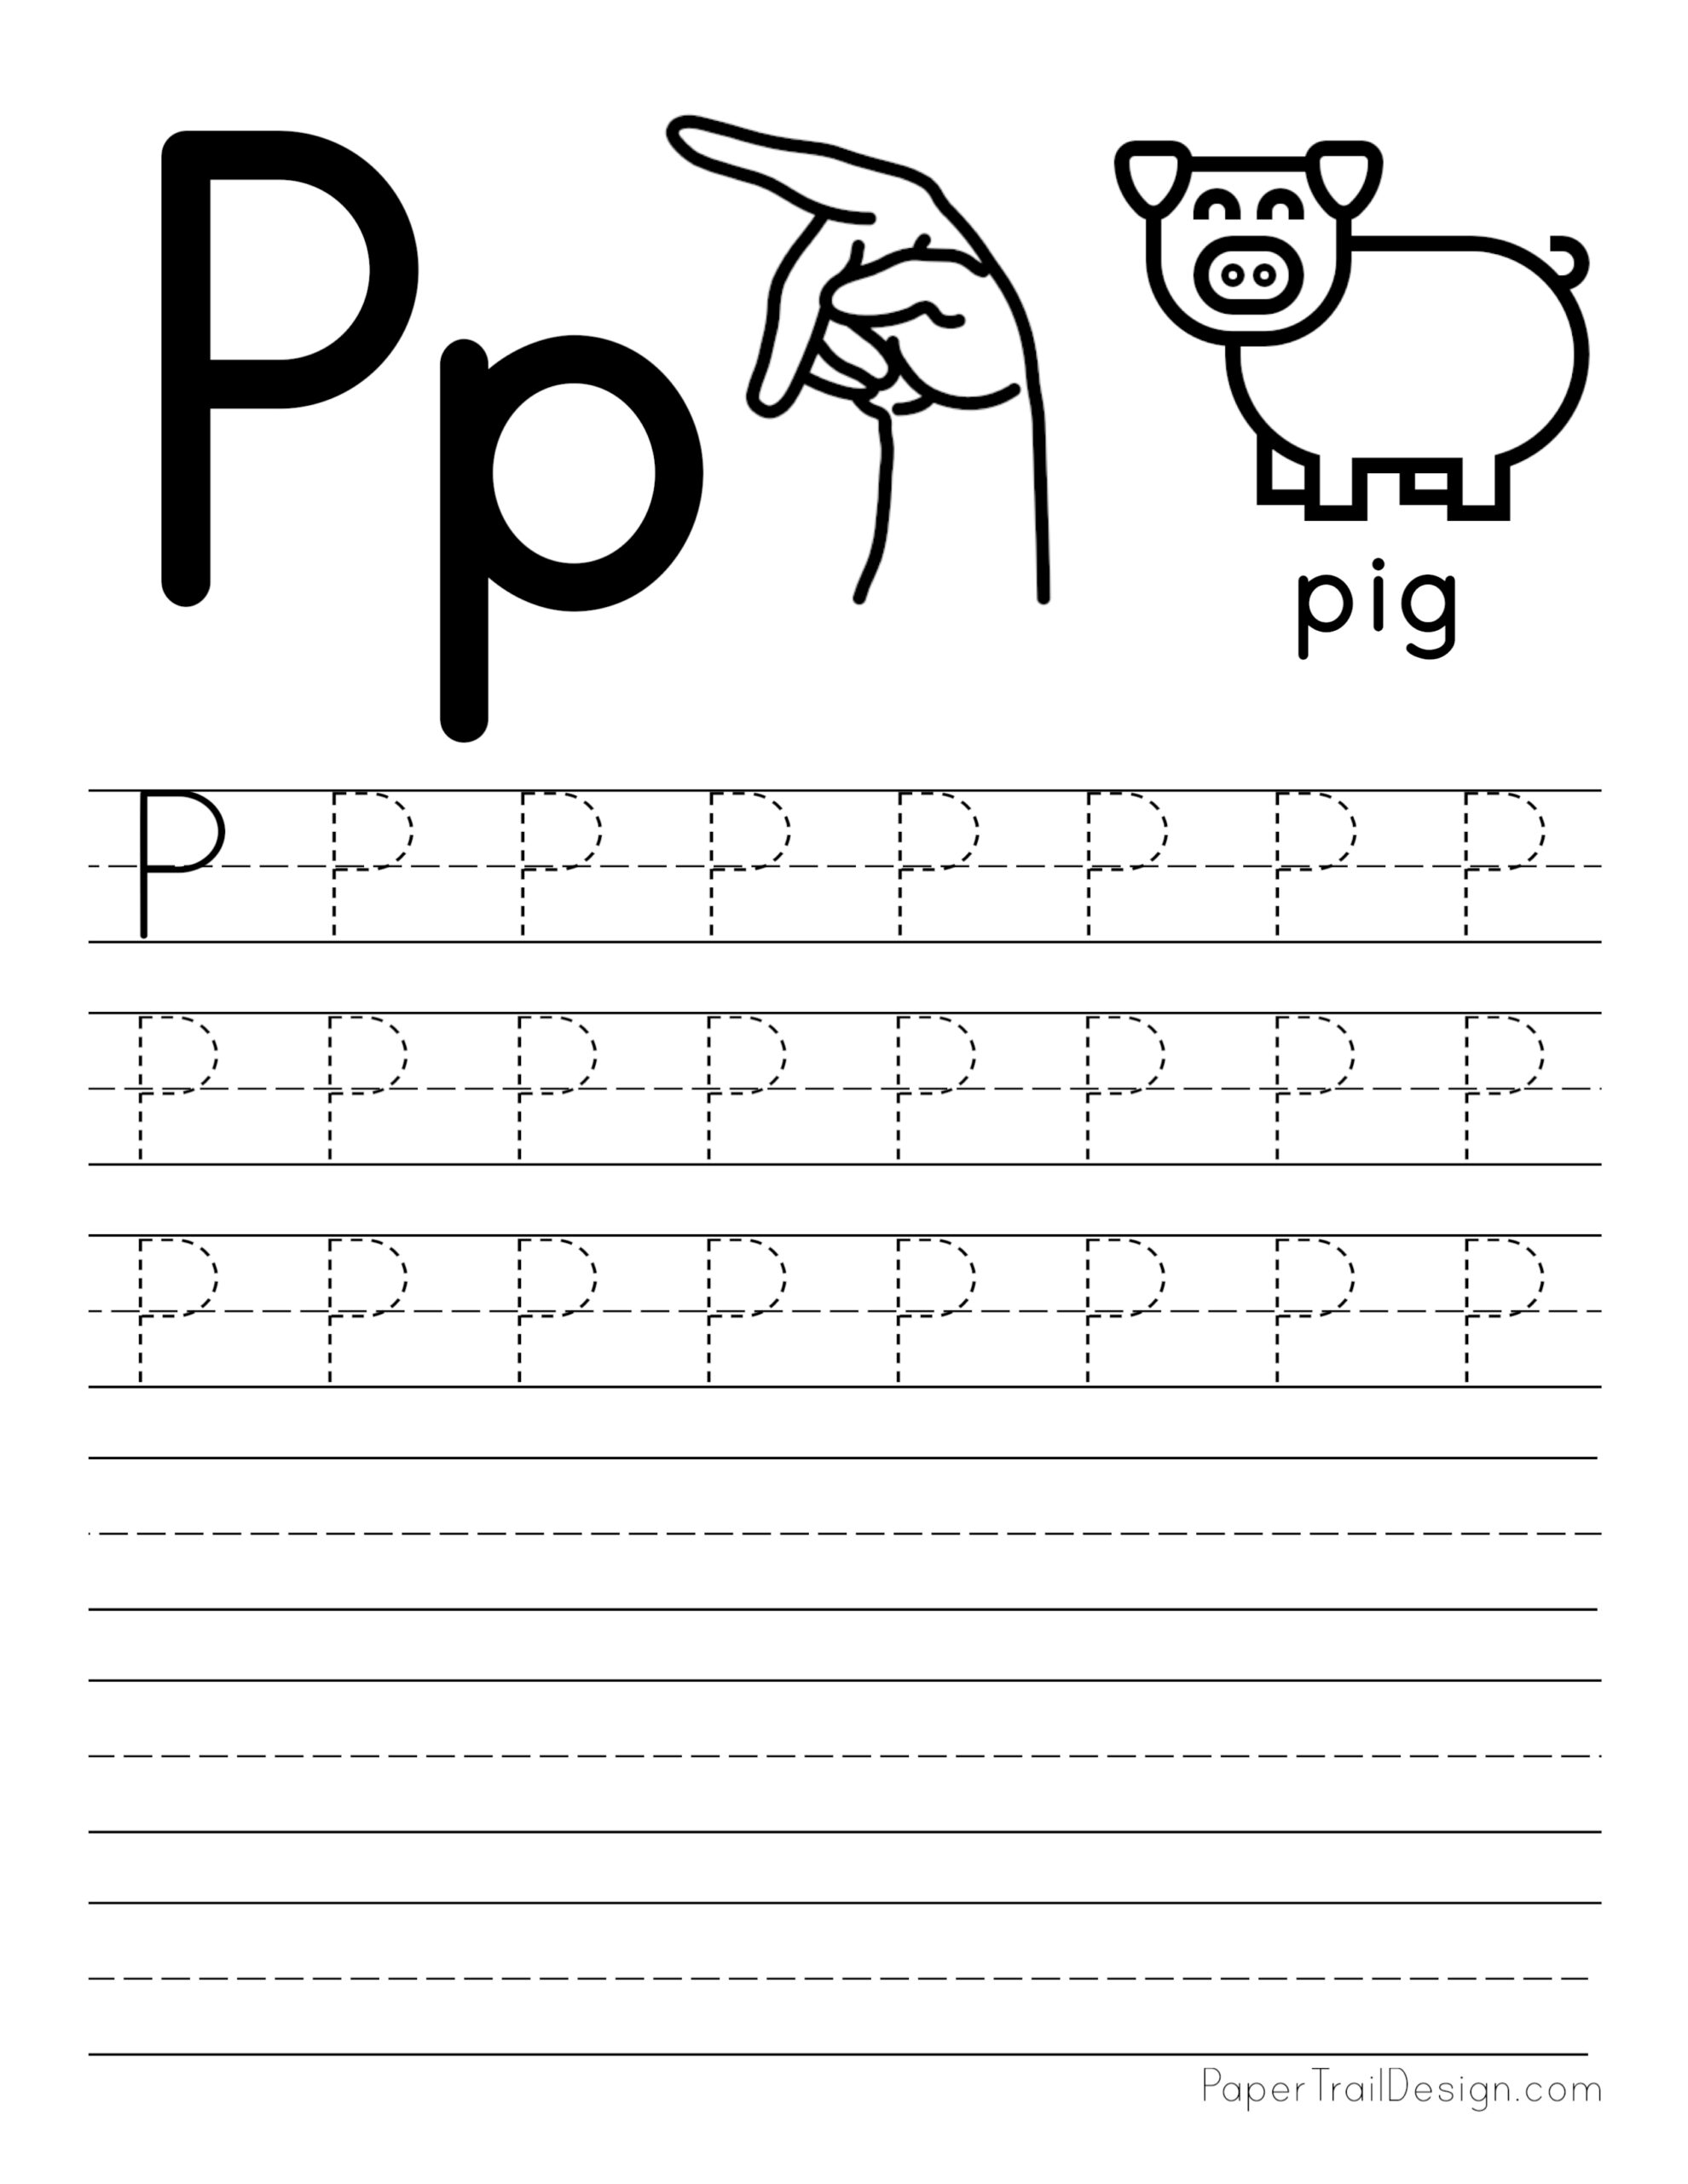 Free Letter Tracing Worksheets - Paper Trail Design